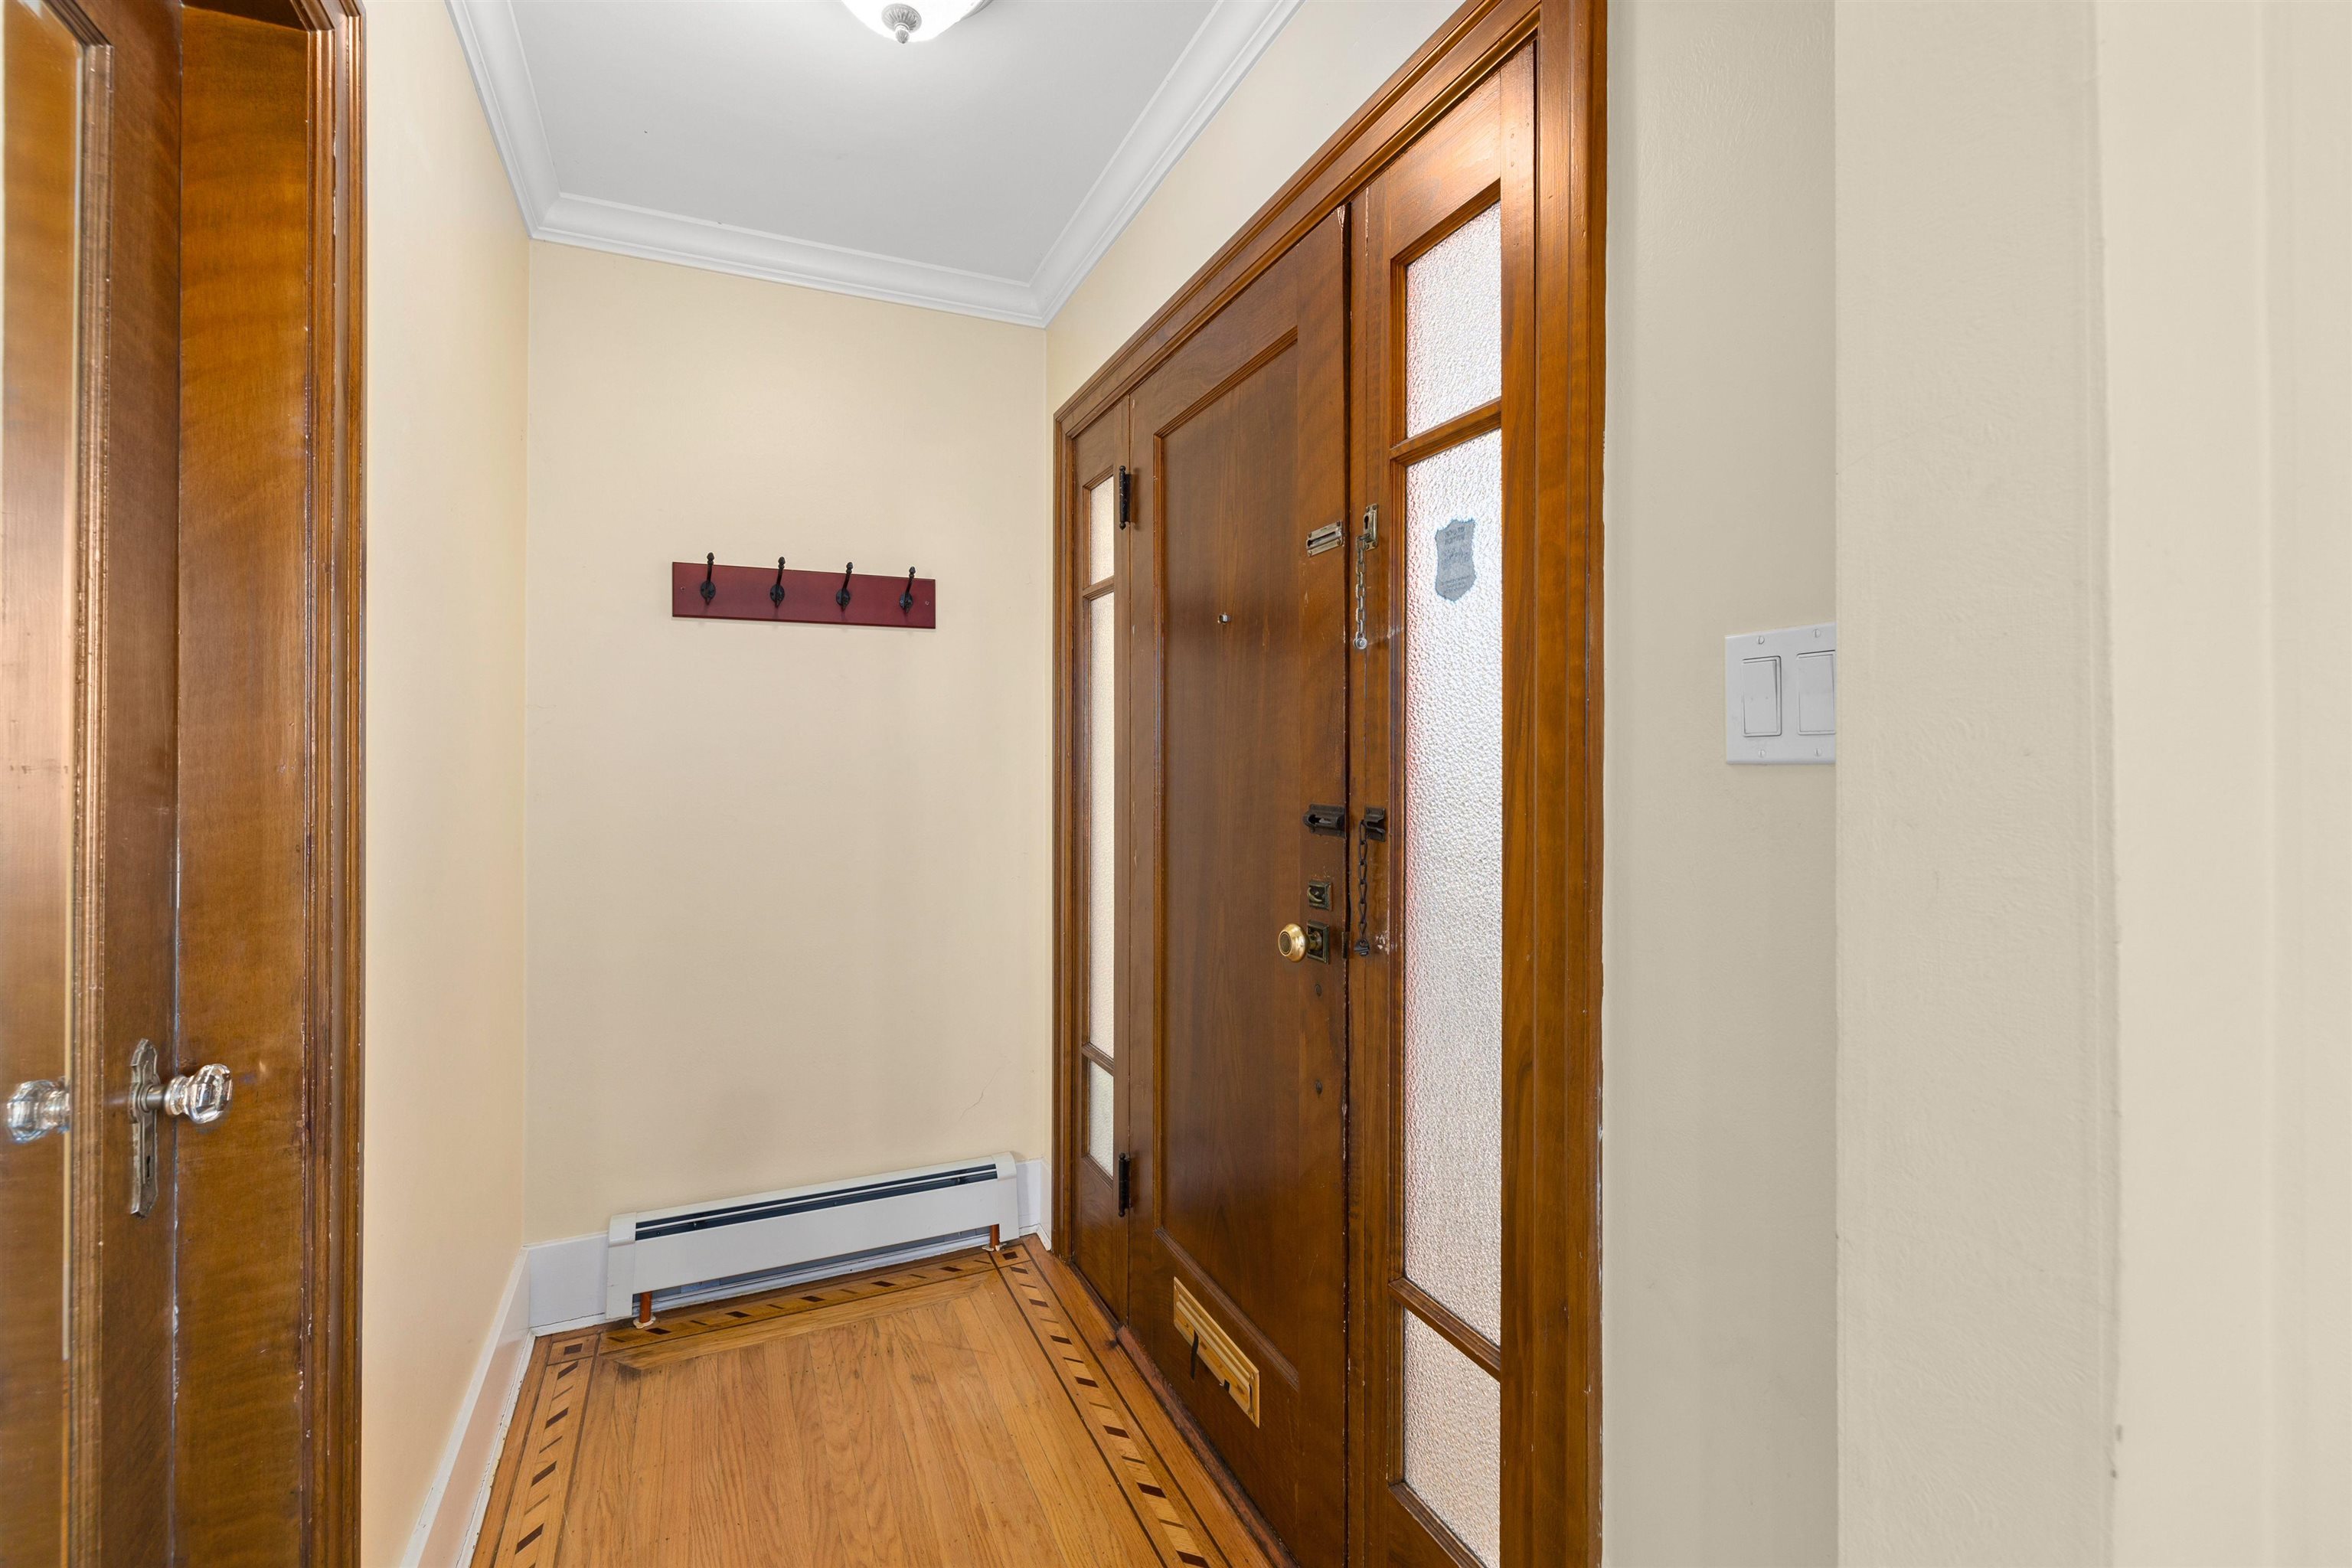 Listing image of 3432 W 22ND AVENUE